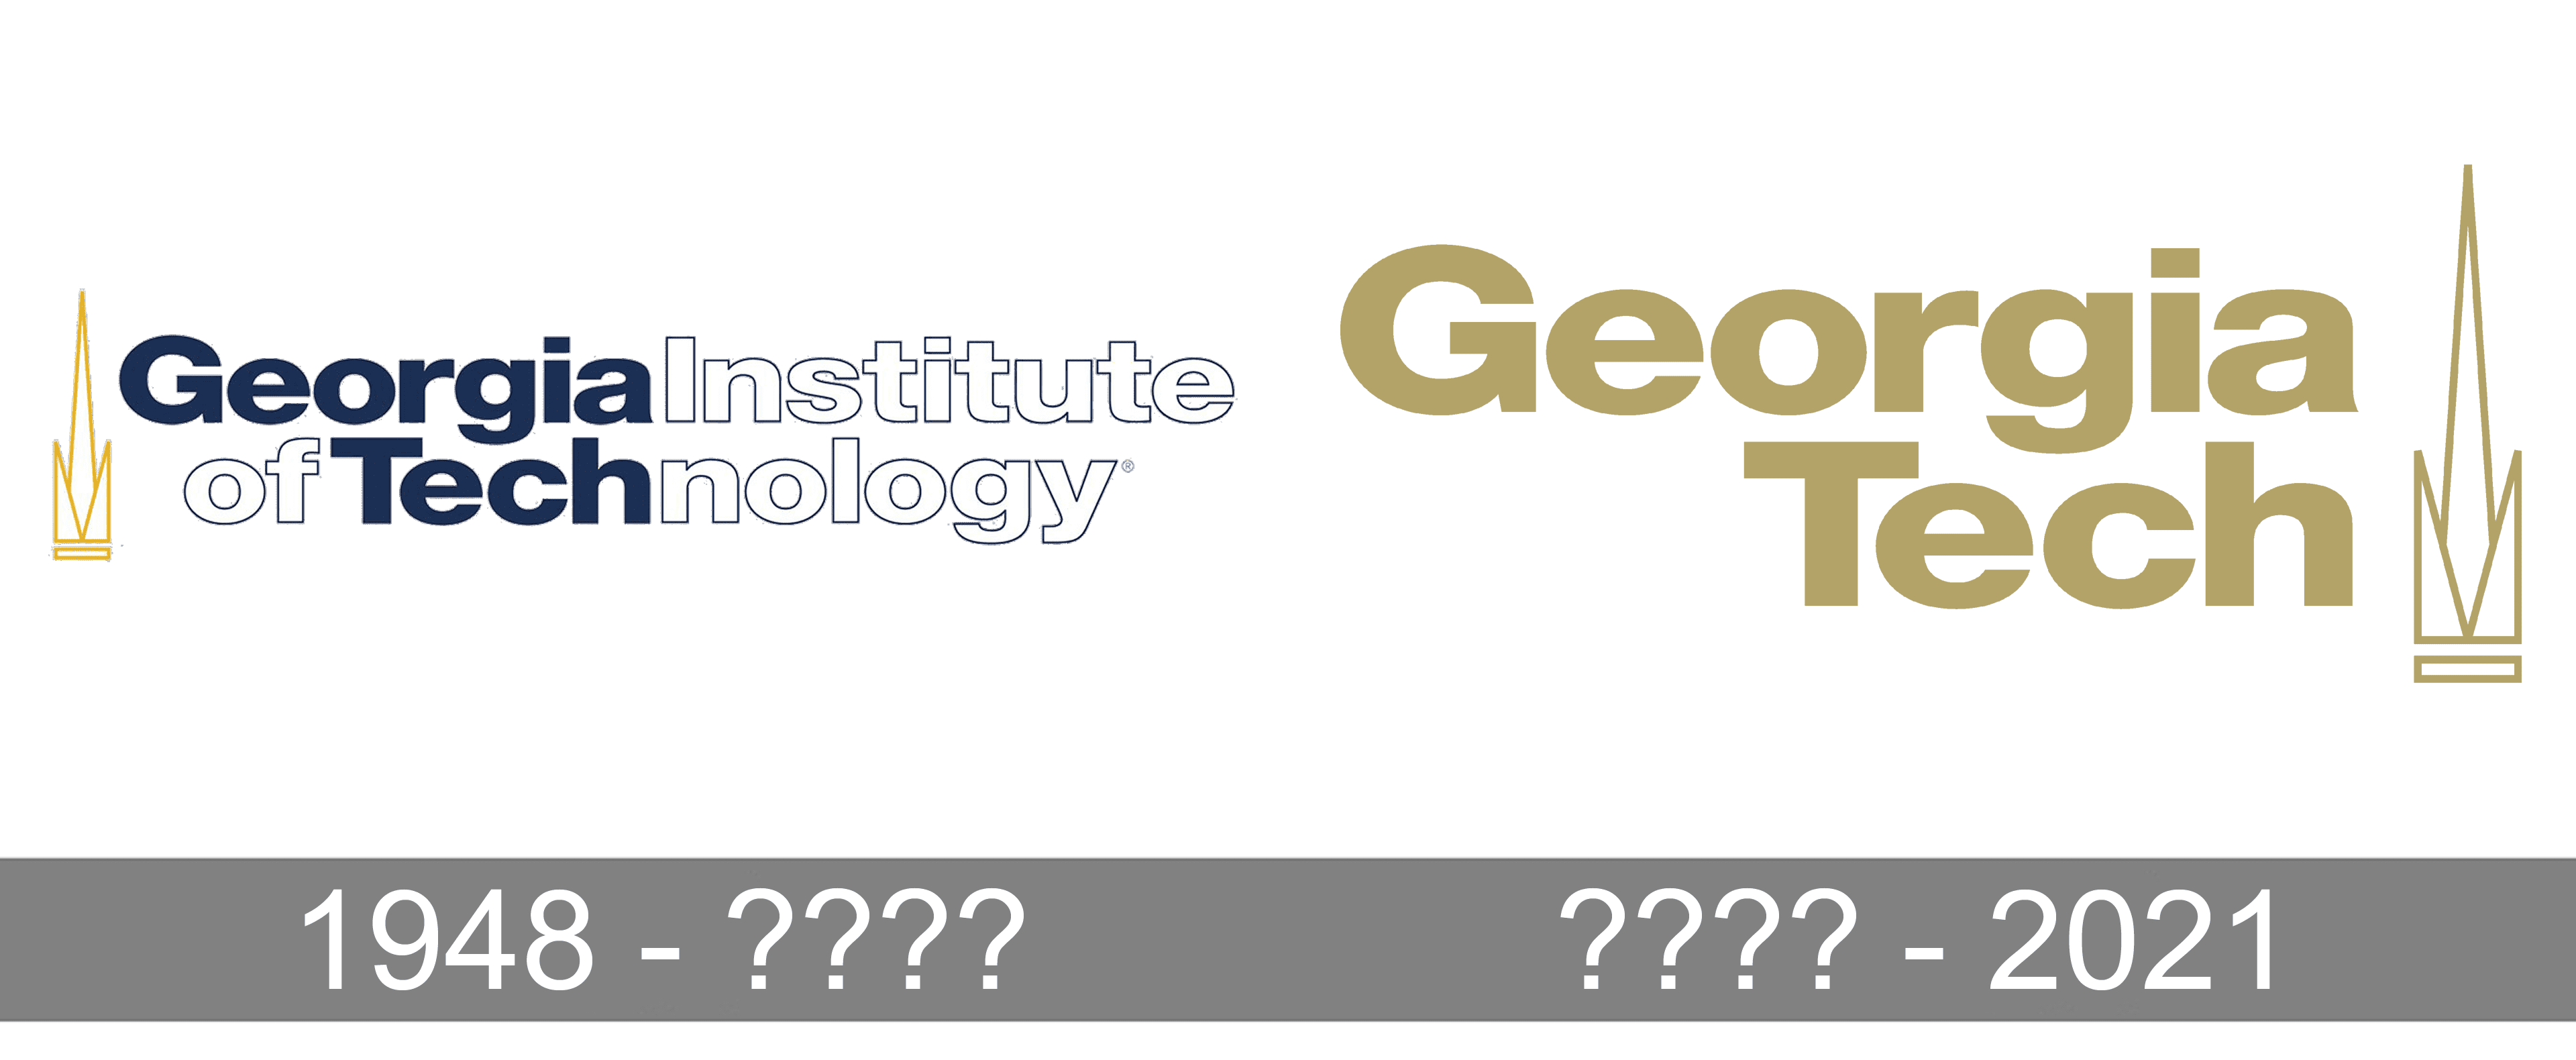 georgia-tech-logo-and-symbol-meaning-history-png-brand